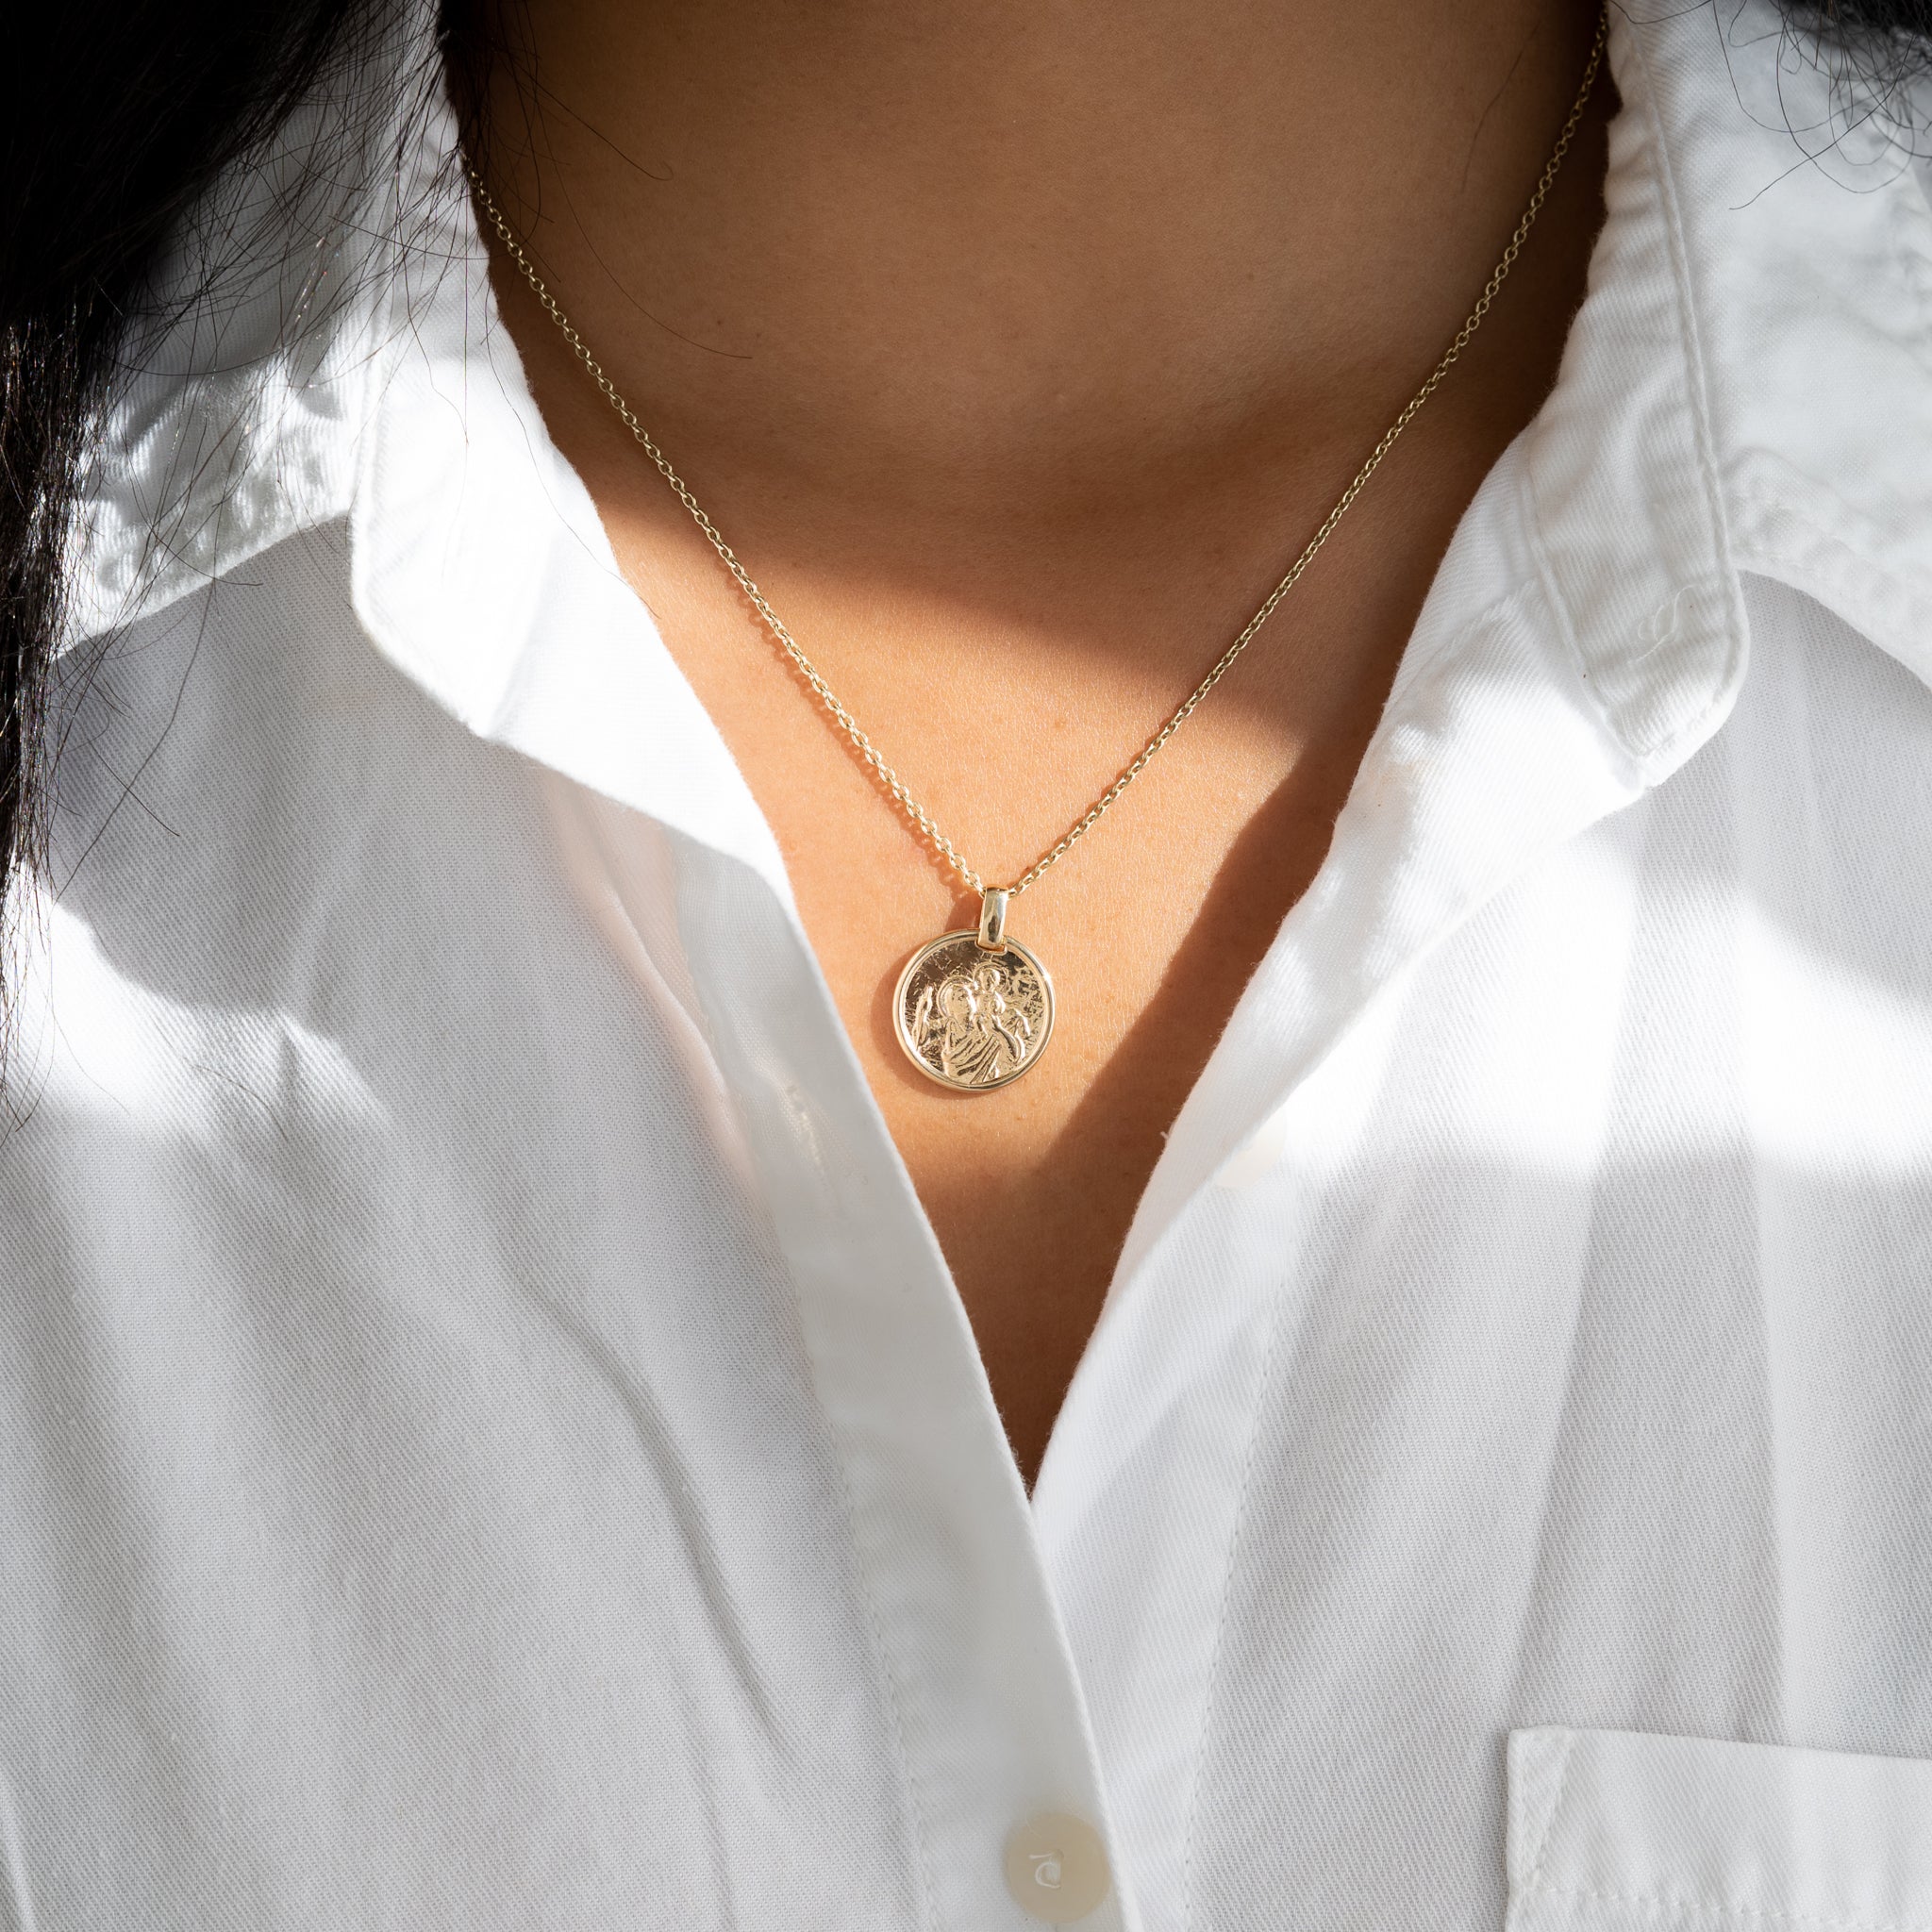 St Christopher Oval Pendant Necklace in Solid 9ct Gold | Men Women Children